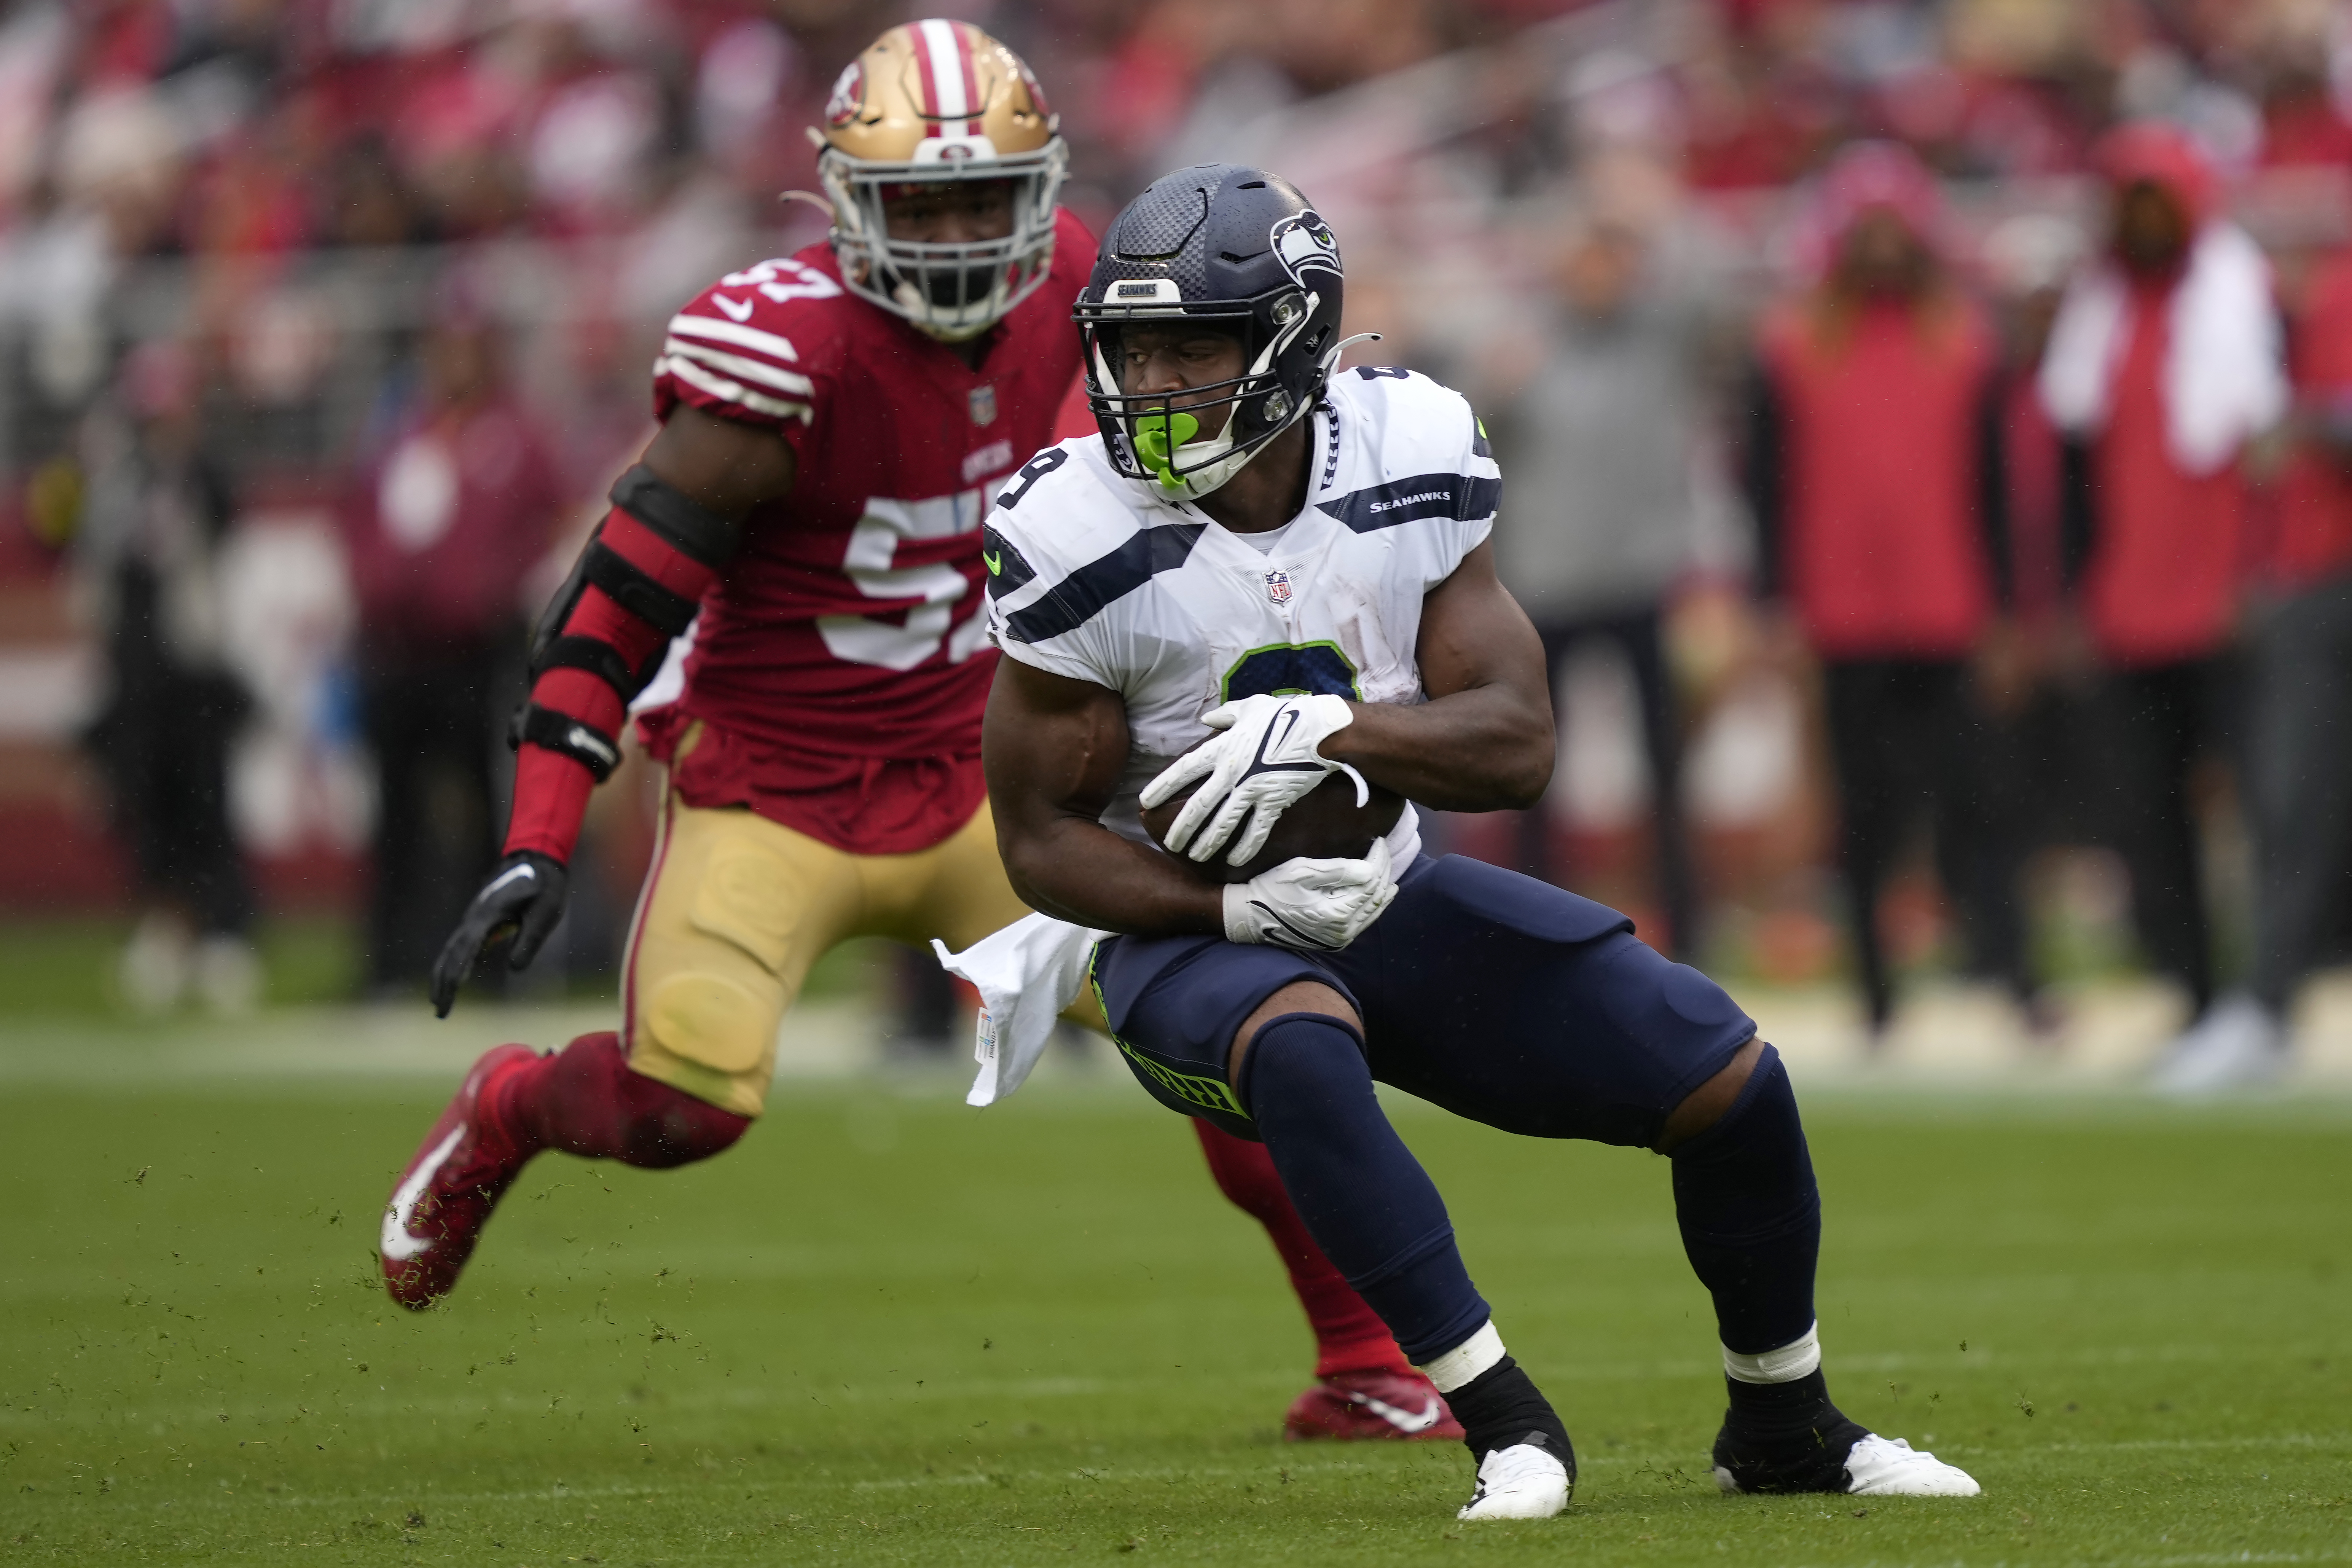 Seahawks vs 49ers wild card game tickets price, how to buy online